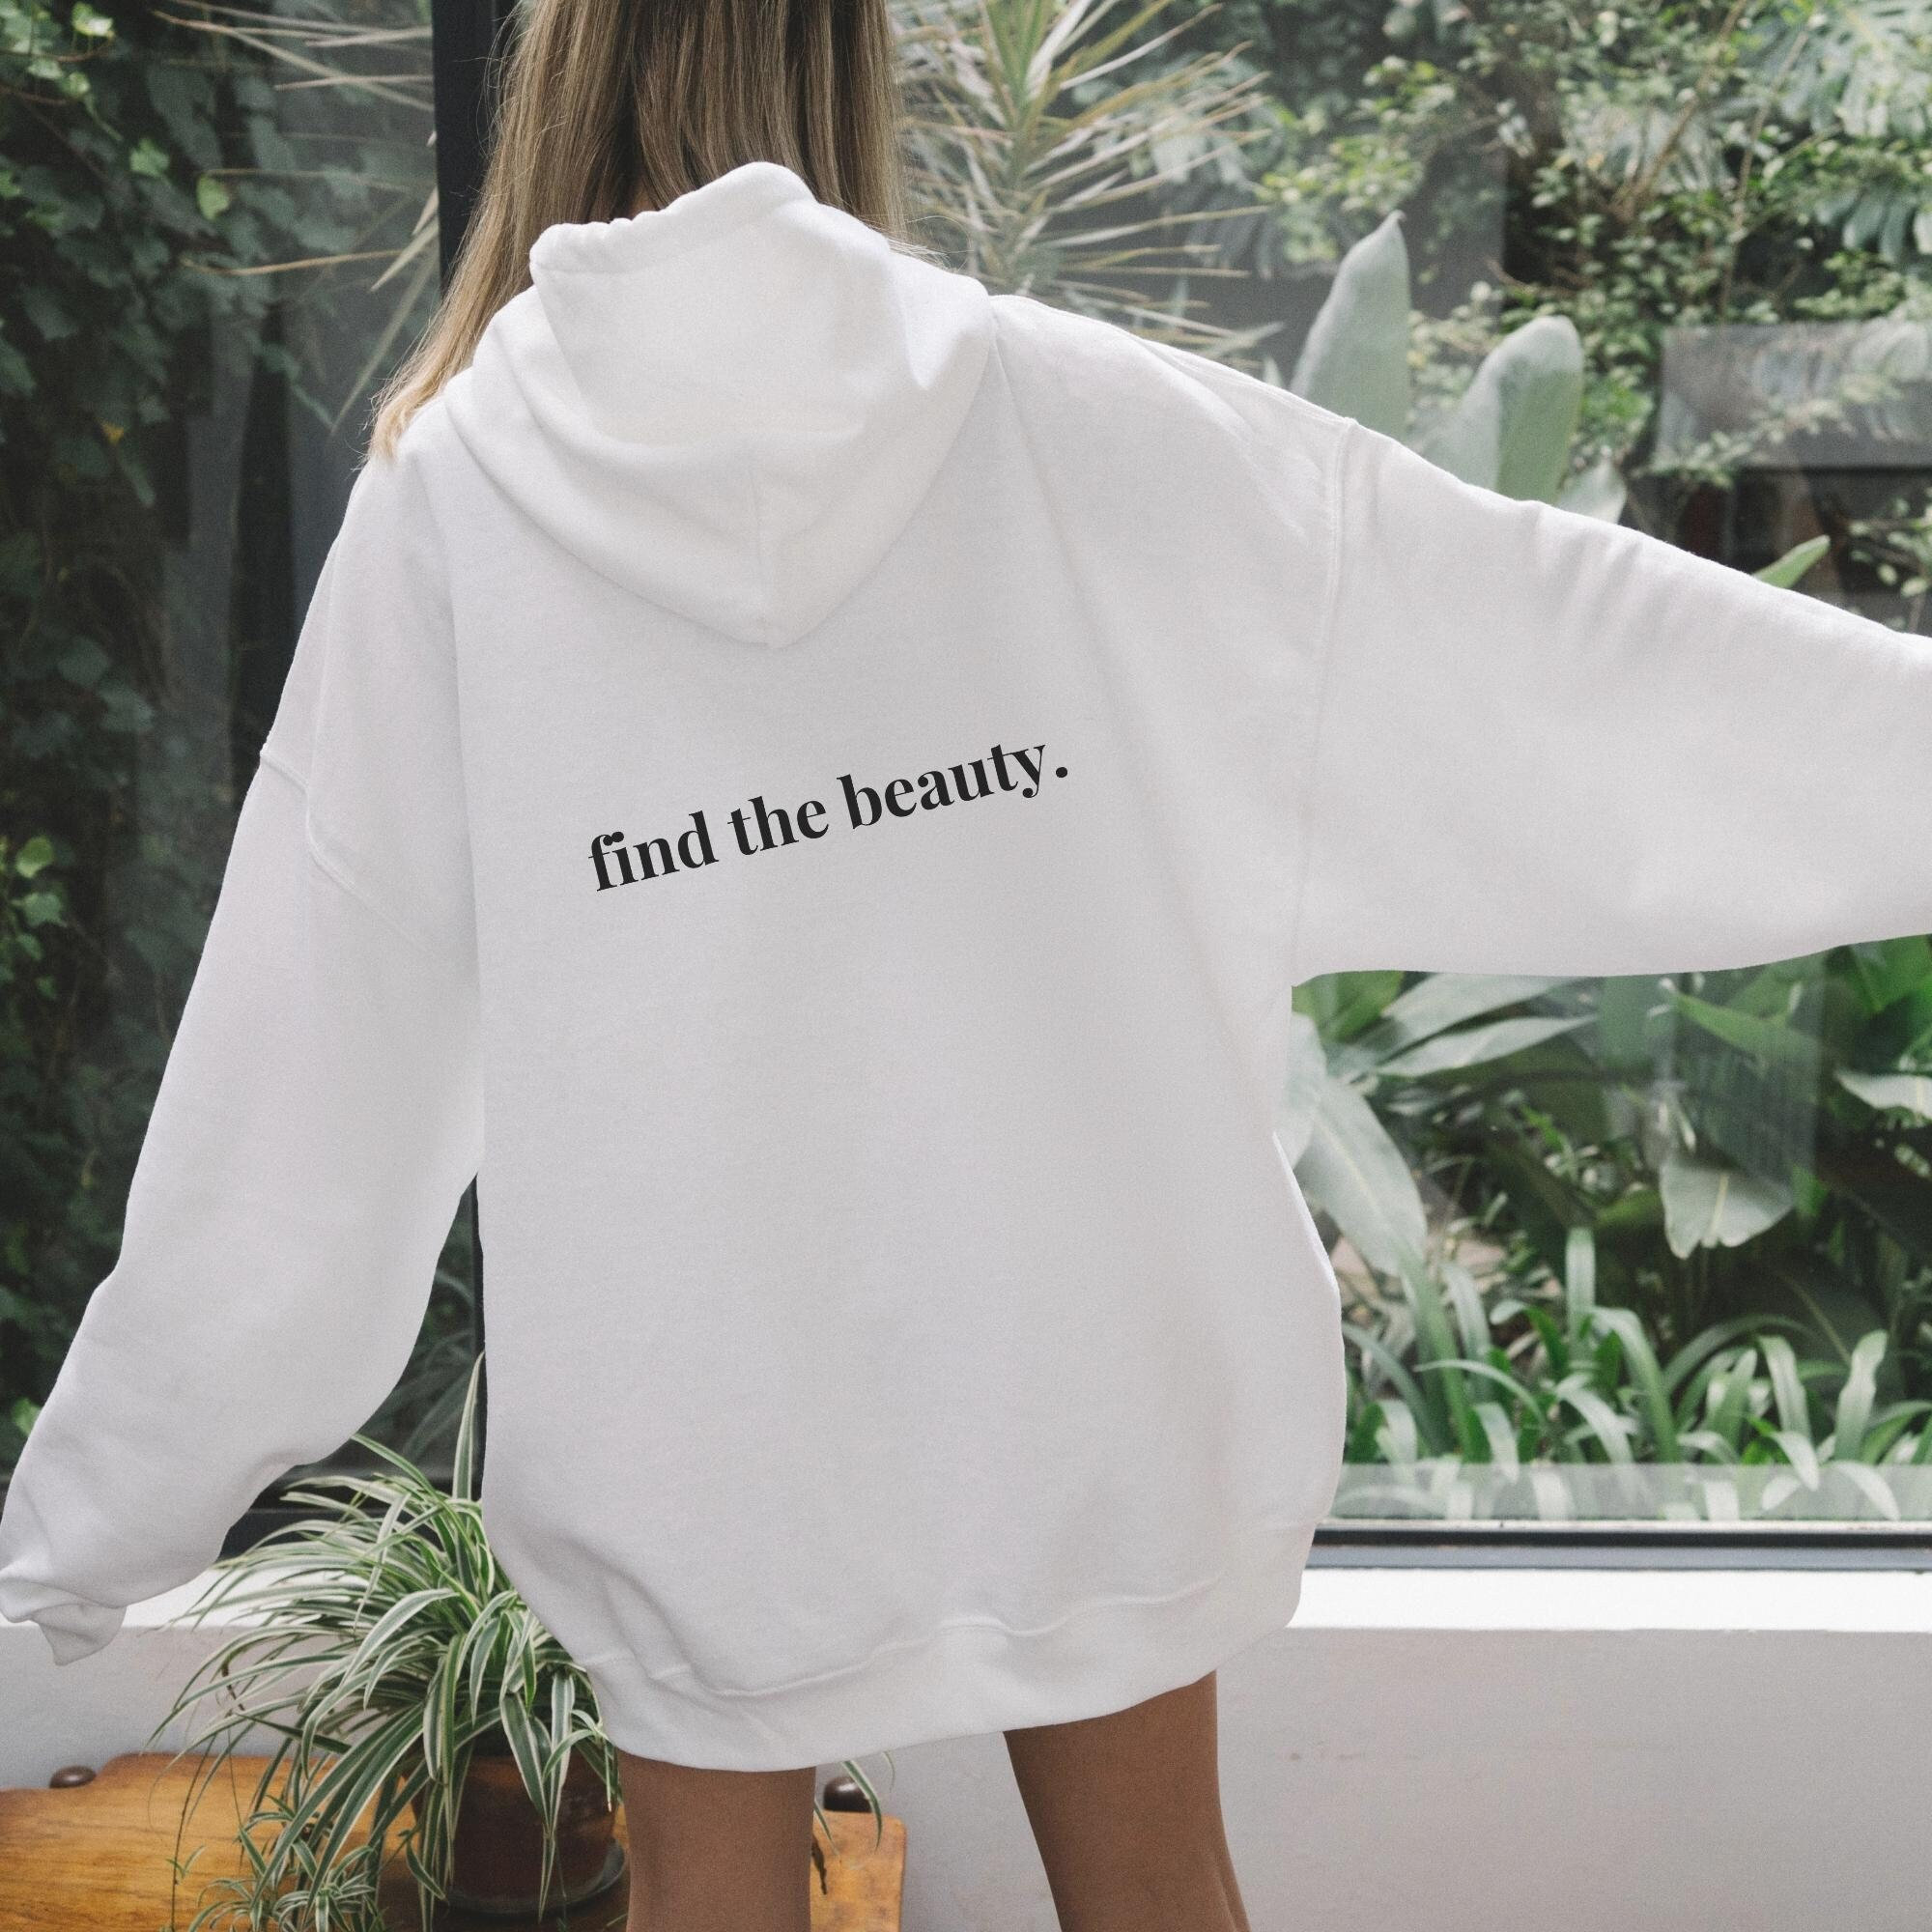 Pole Star Oversized Hoodie For Women - Aesthetic Shop